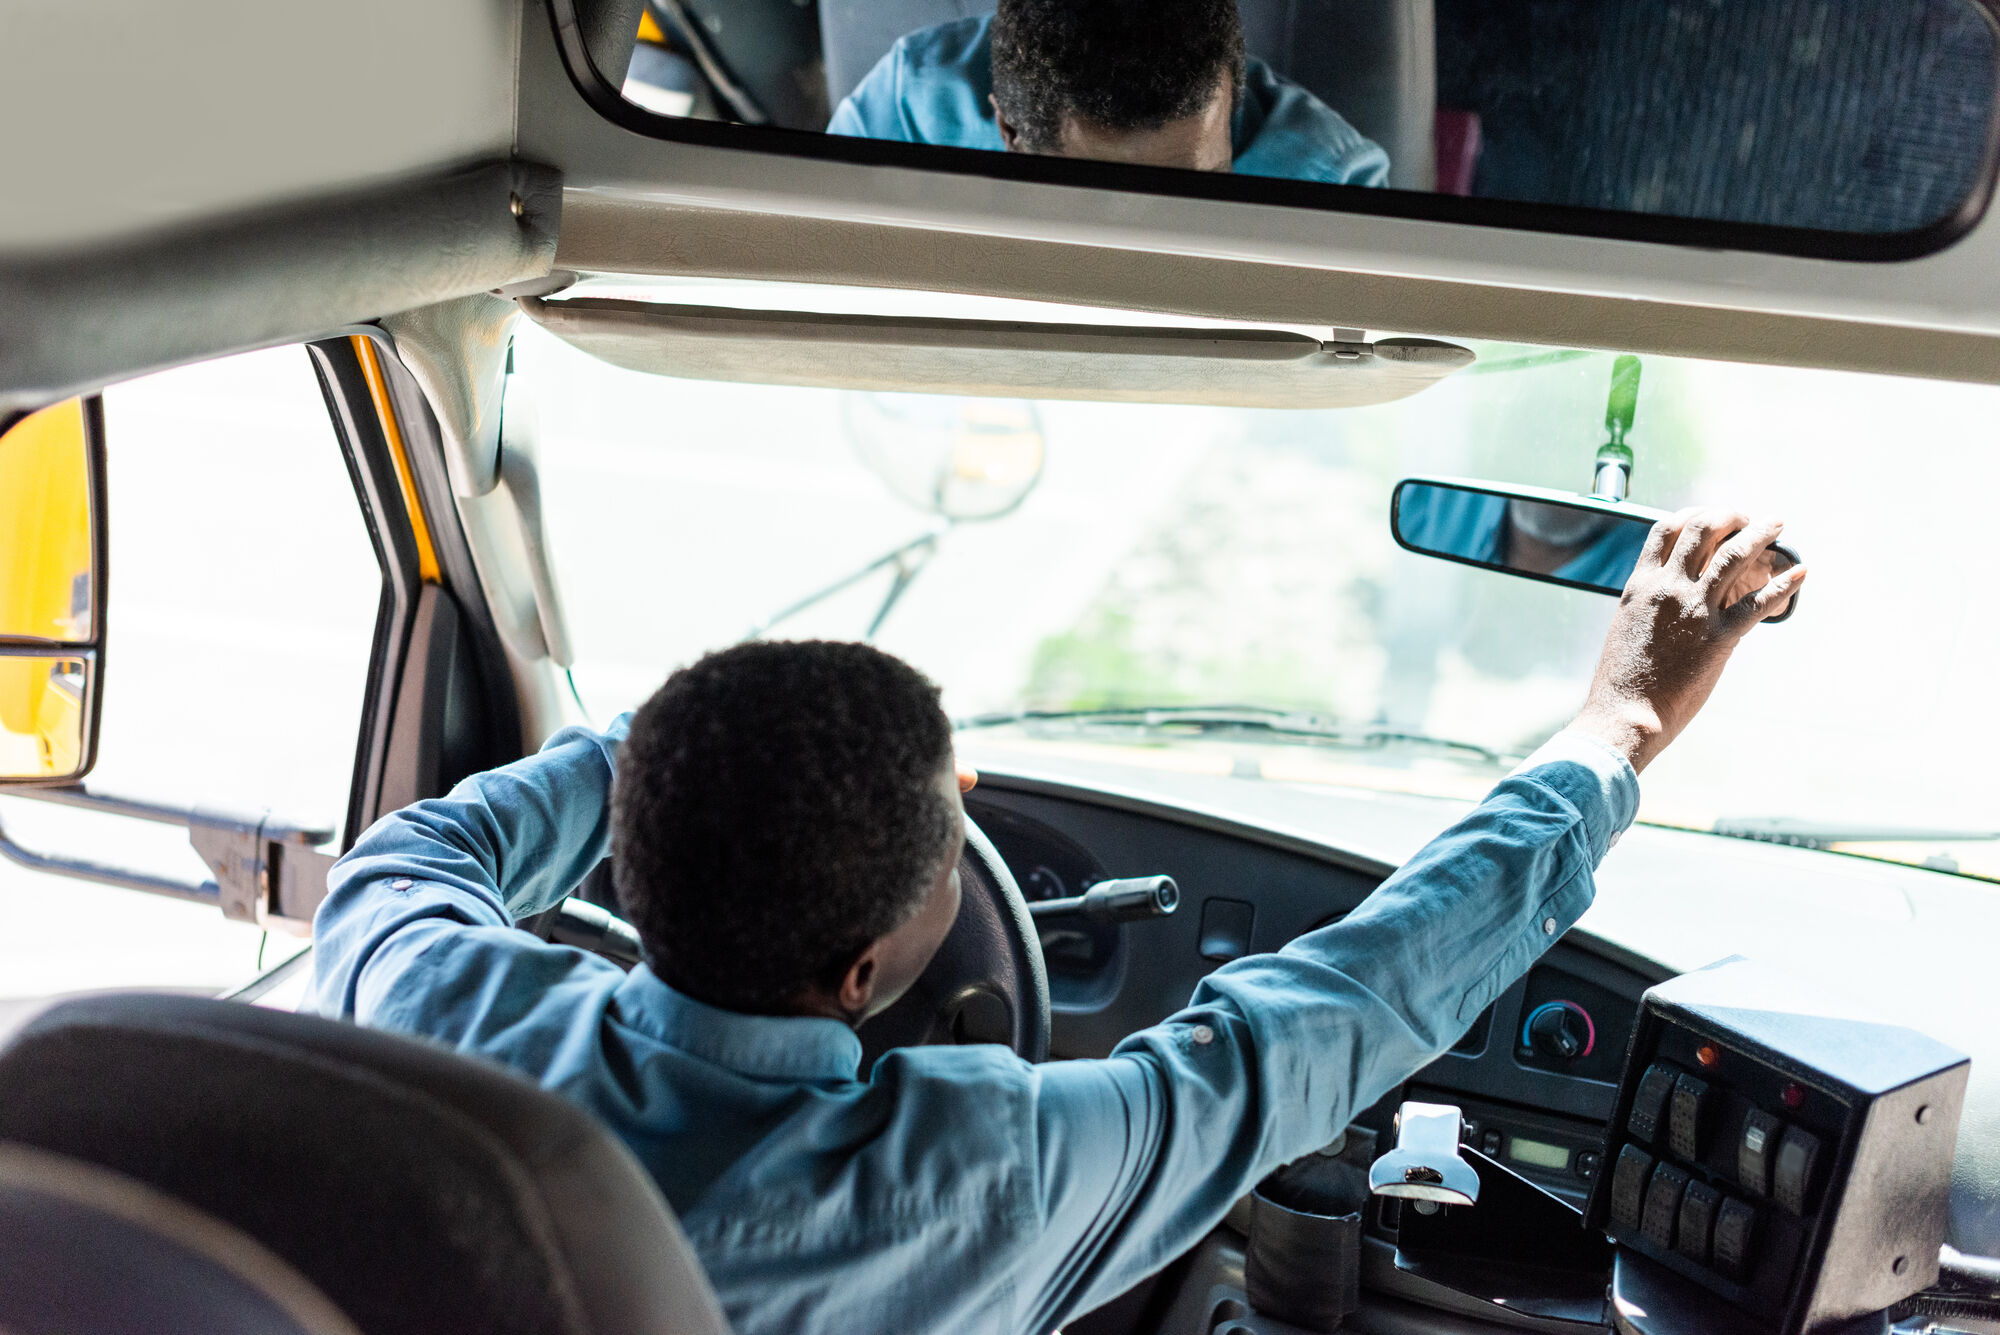 Bus driver checking the rear-view mirror